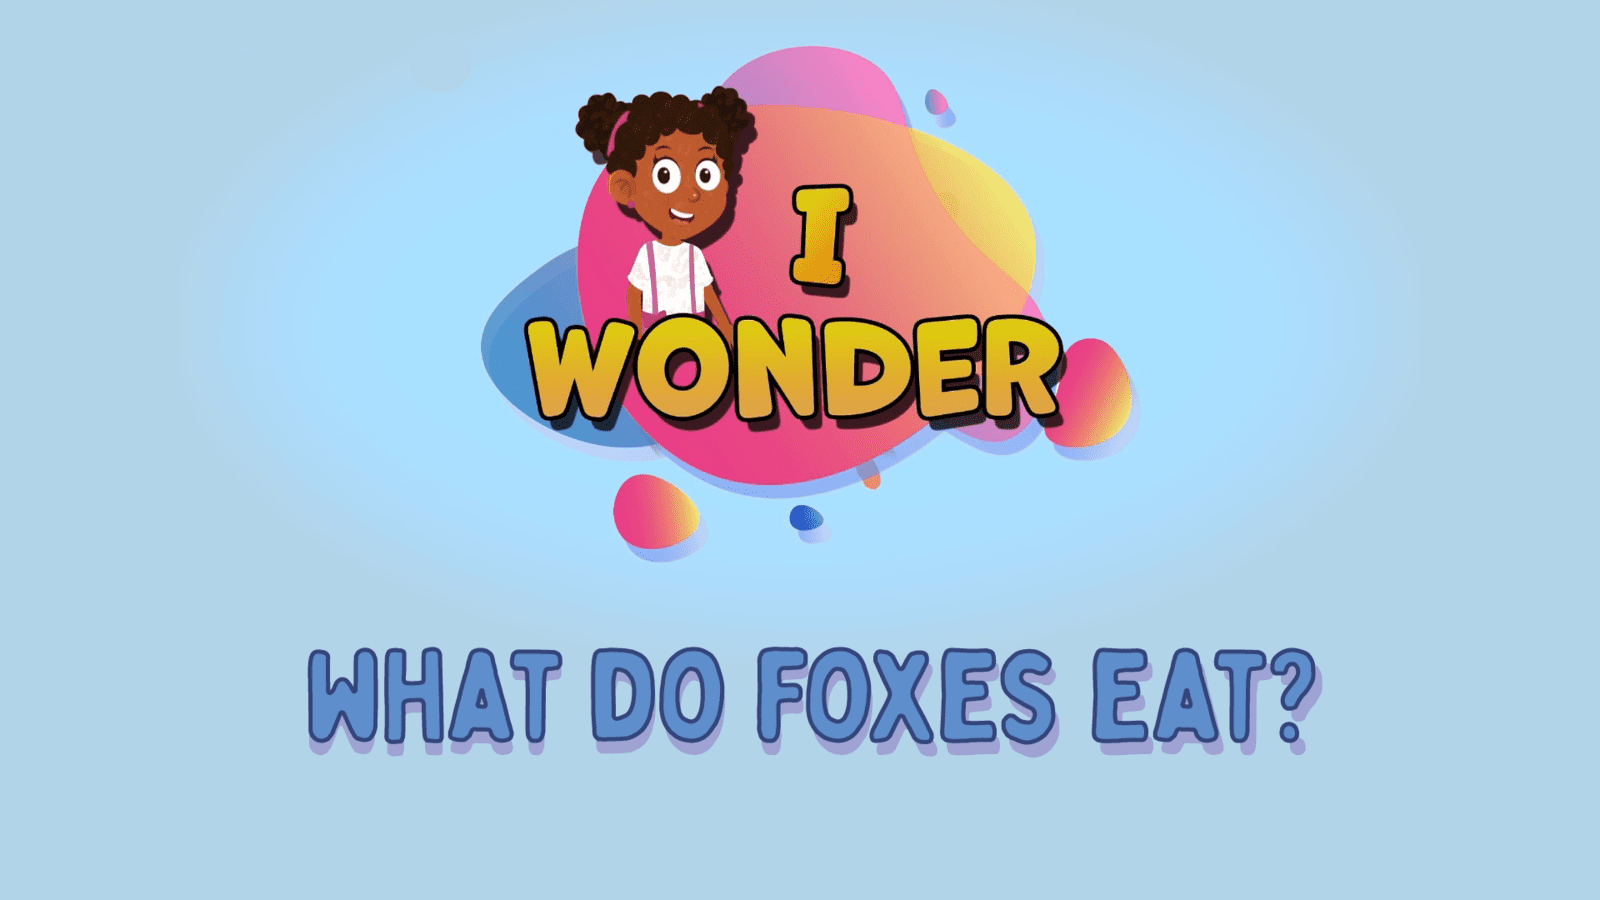 What Do Foxes Eat?